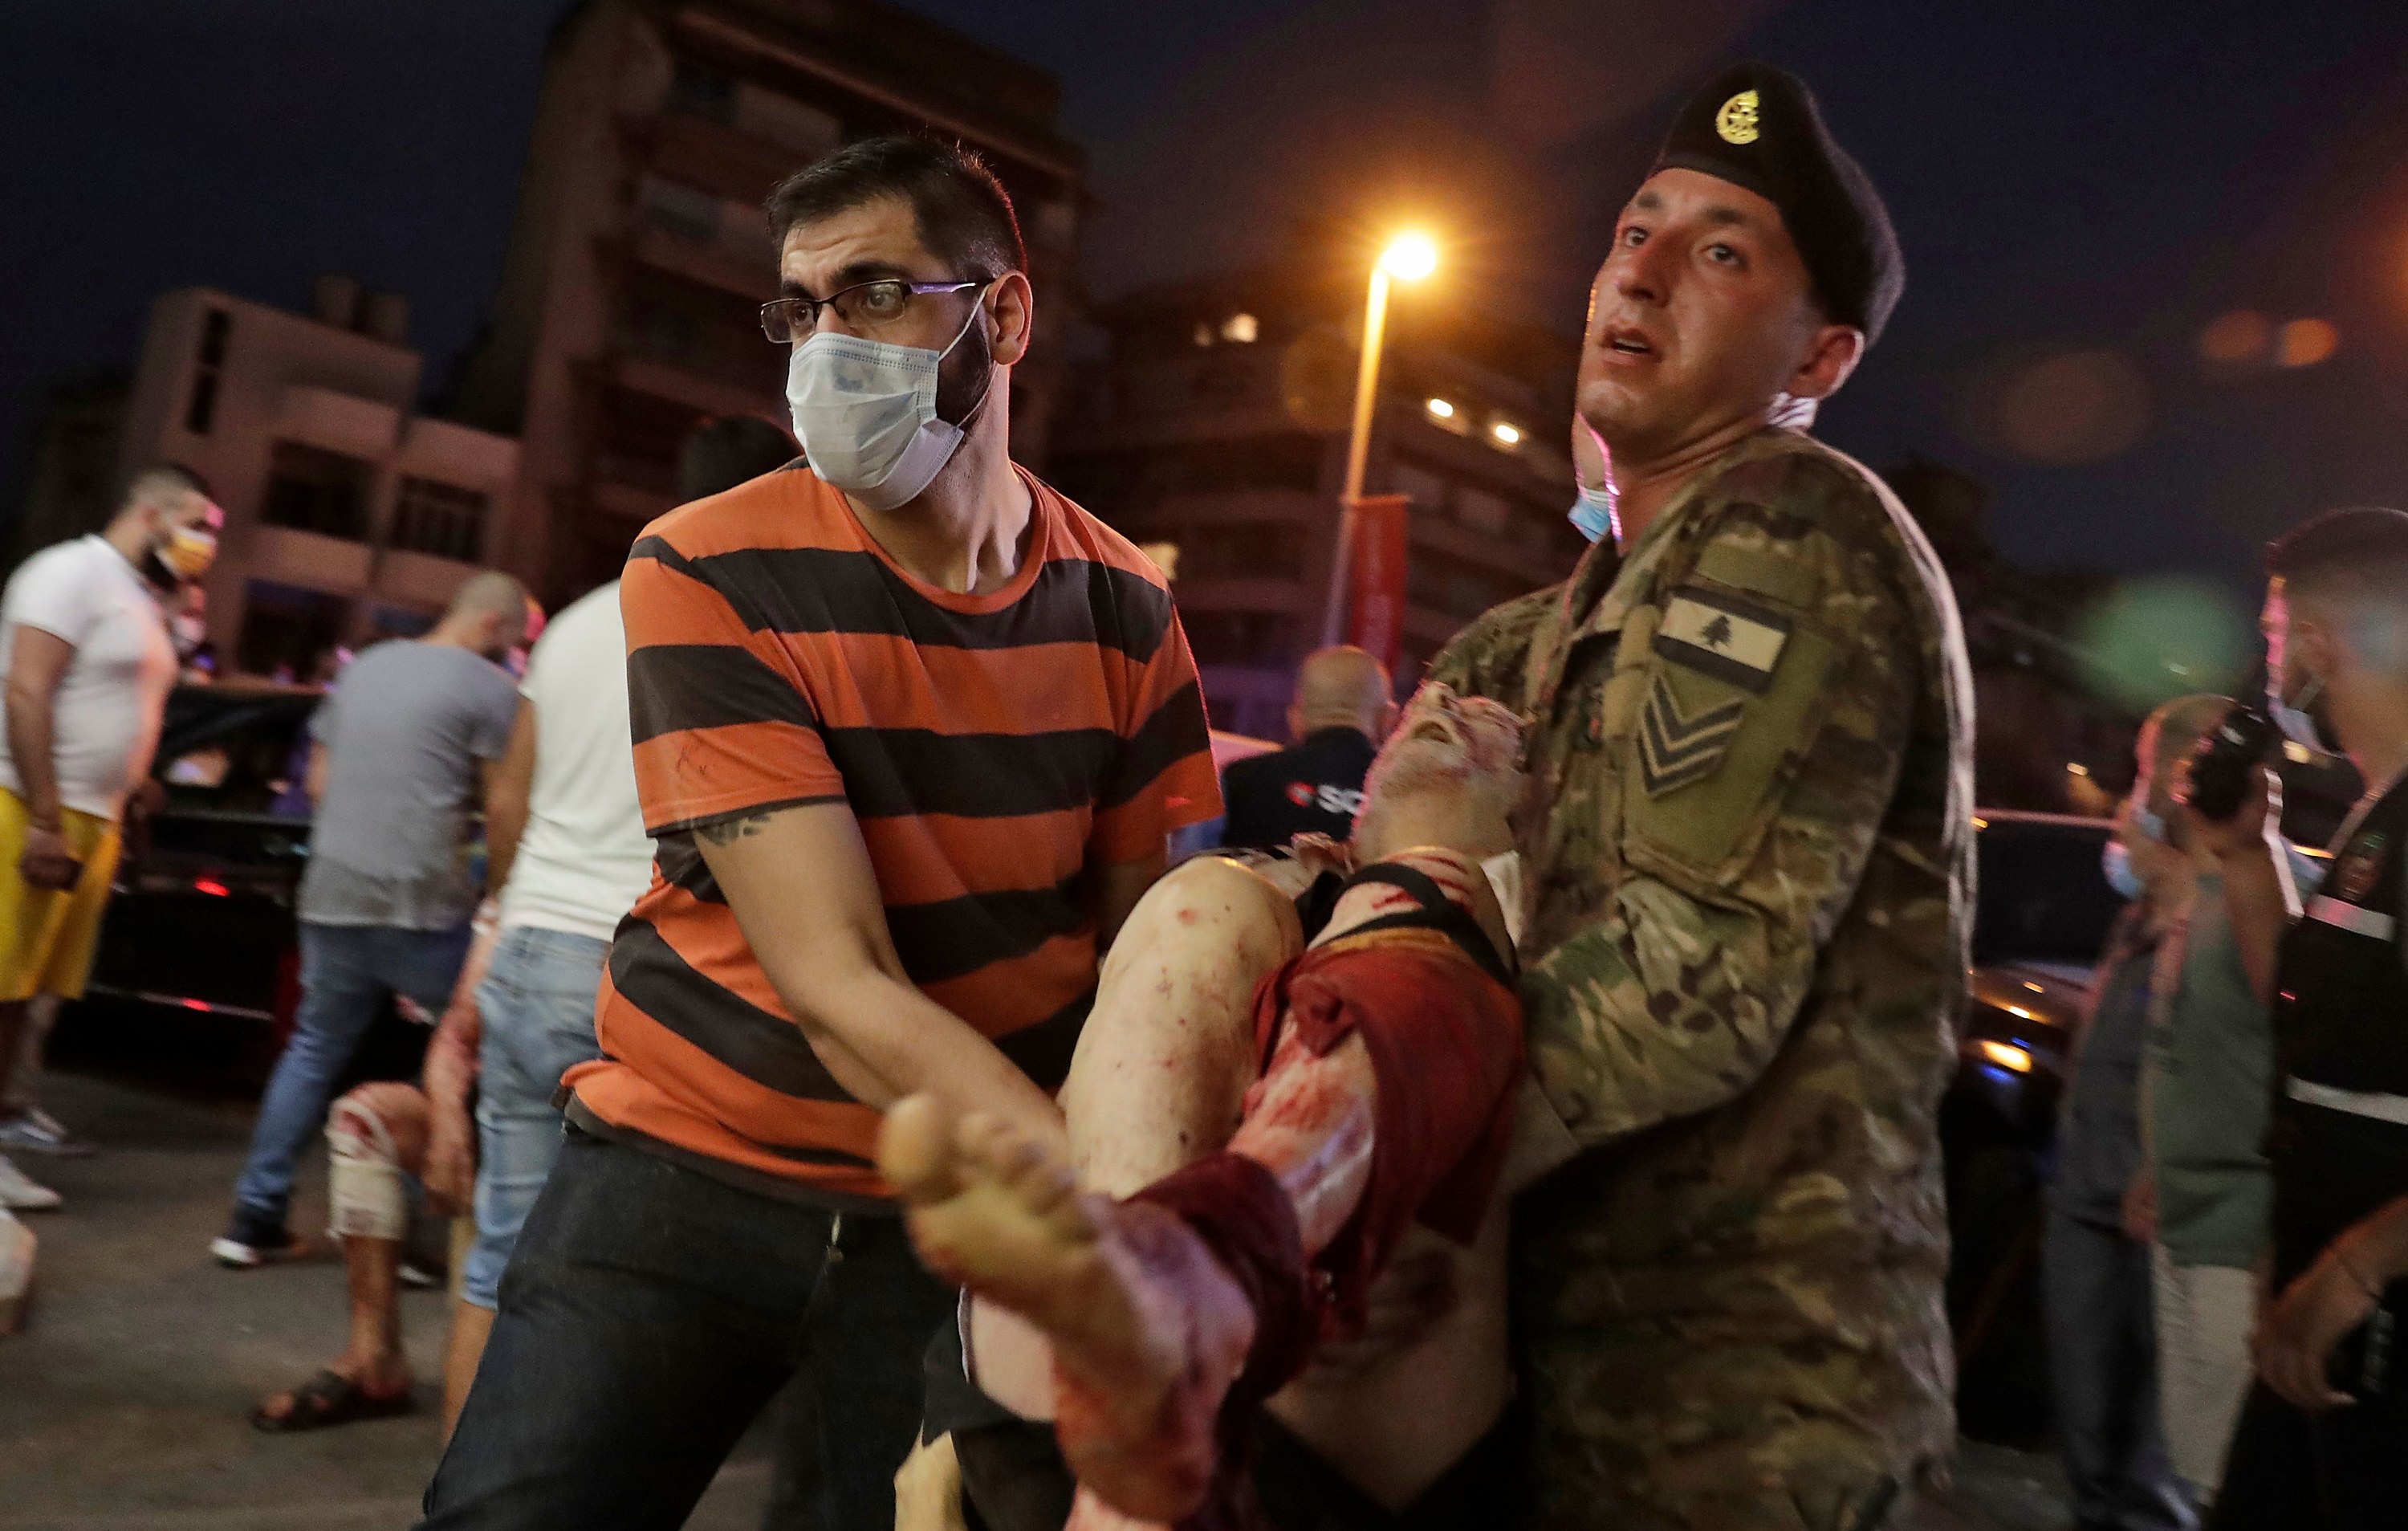 A man in a striped shirt and a mask carries a person with a leg injury down a crowded street with the help of a Lebanese soldier in uniform 